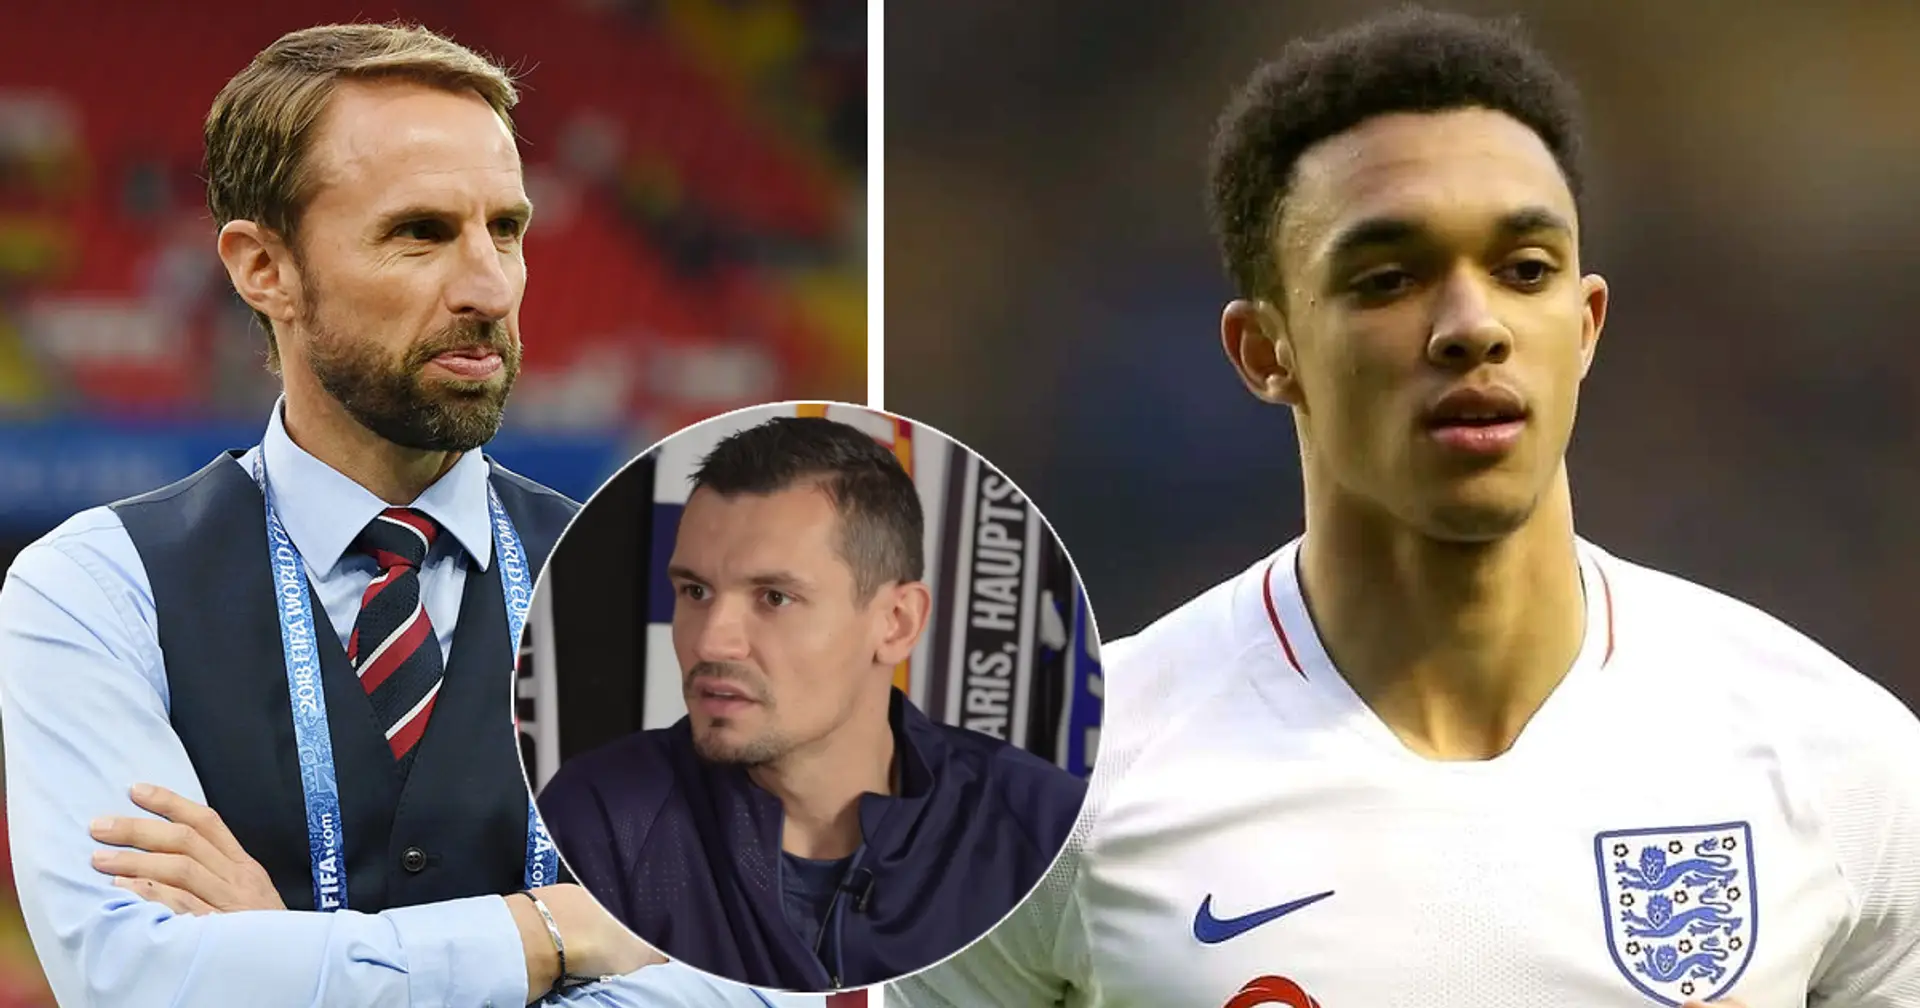 'There is no question, of course he deserves a spot': Lovren speaks out on Trent's England chances